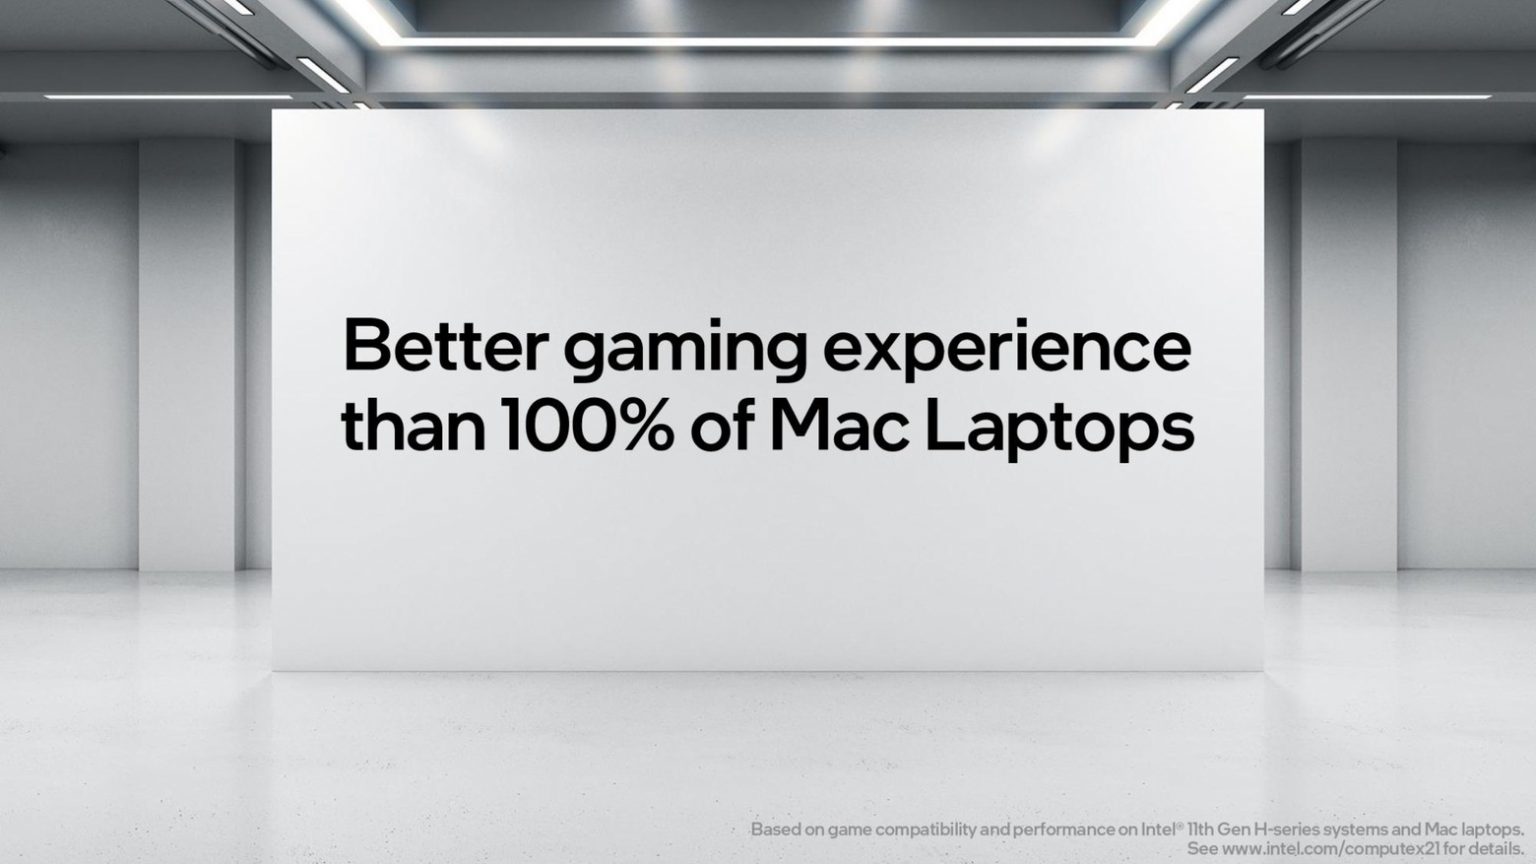 Intel urges Mac gamers to switch to Windows